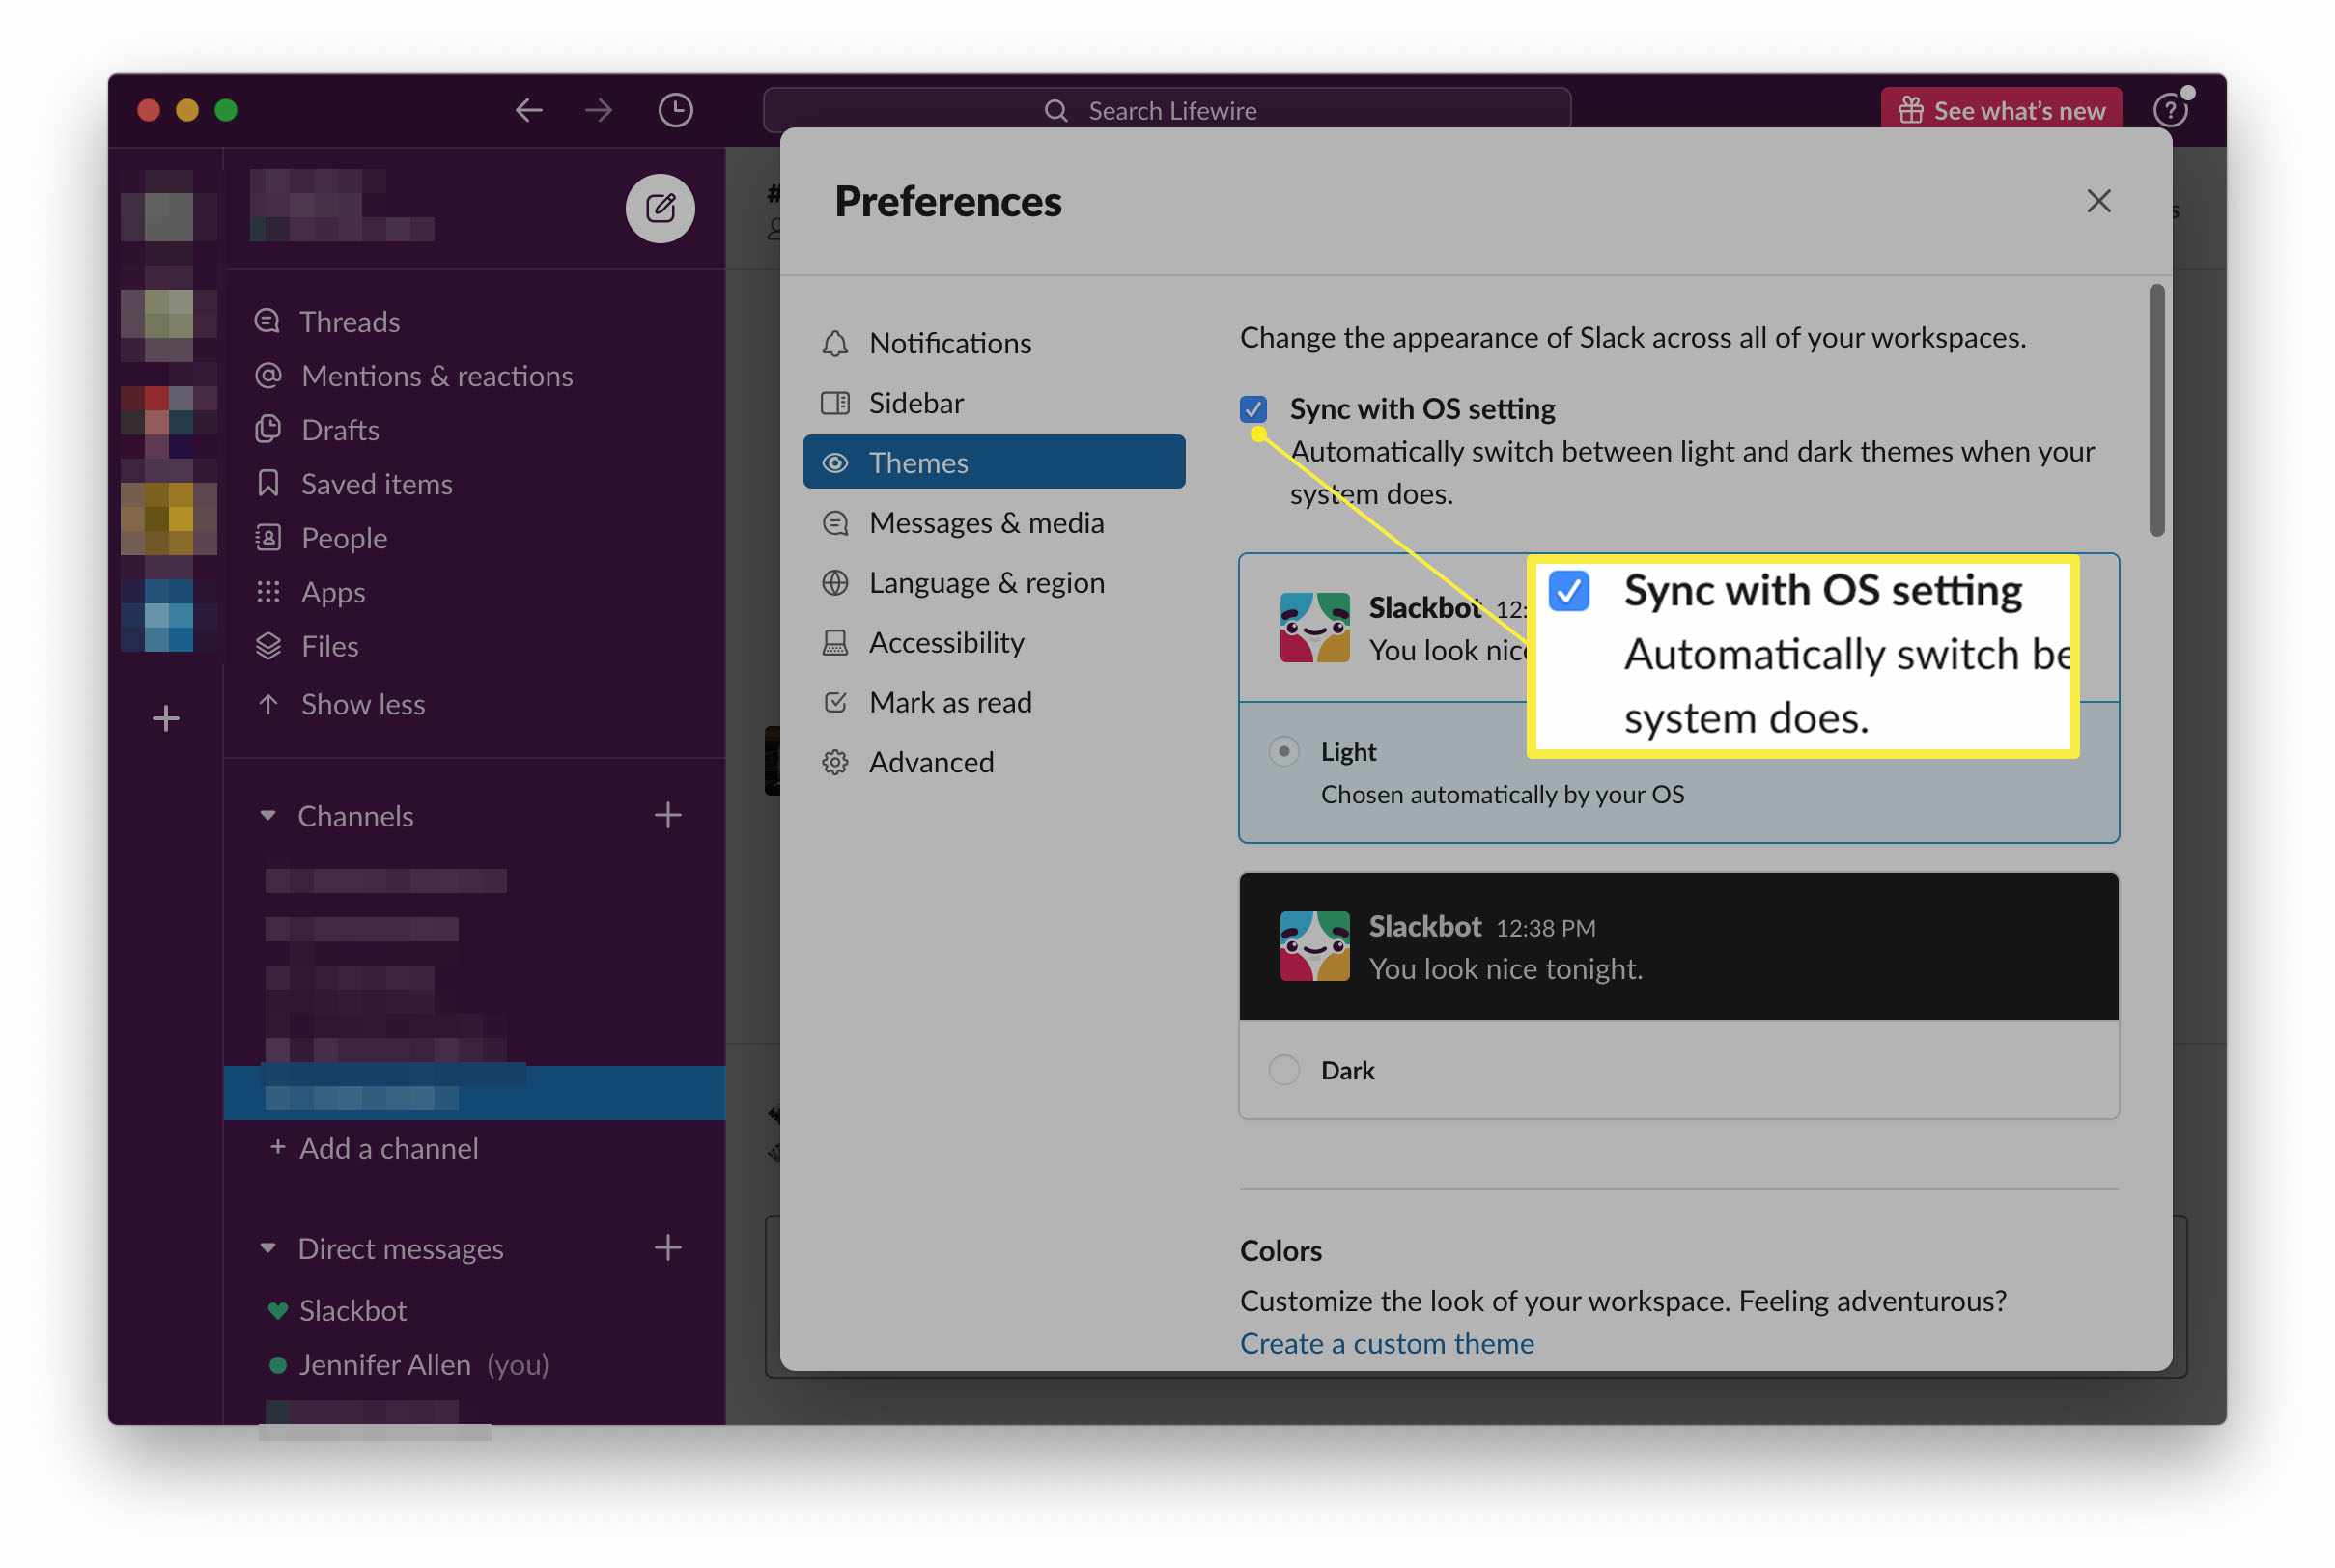 Slack with Sync with OS setting highlighted